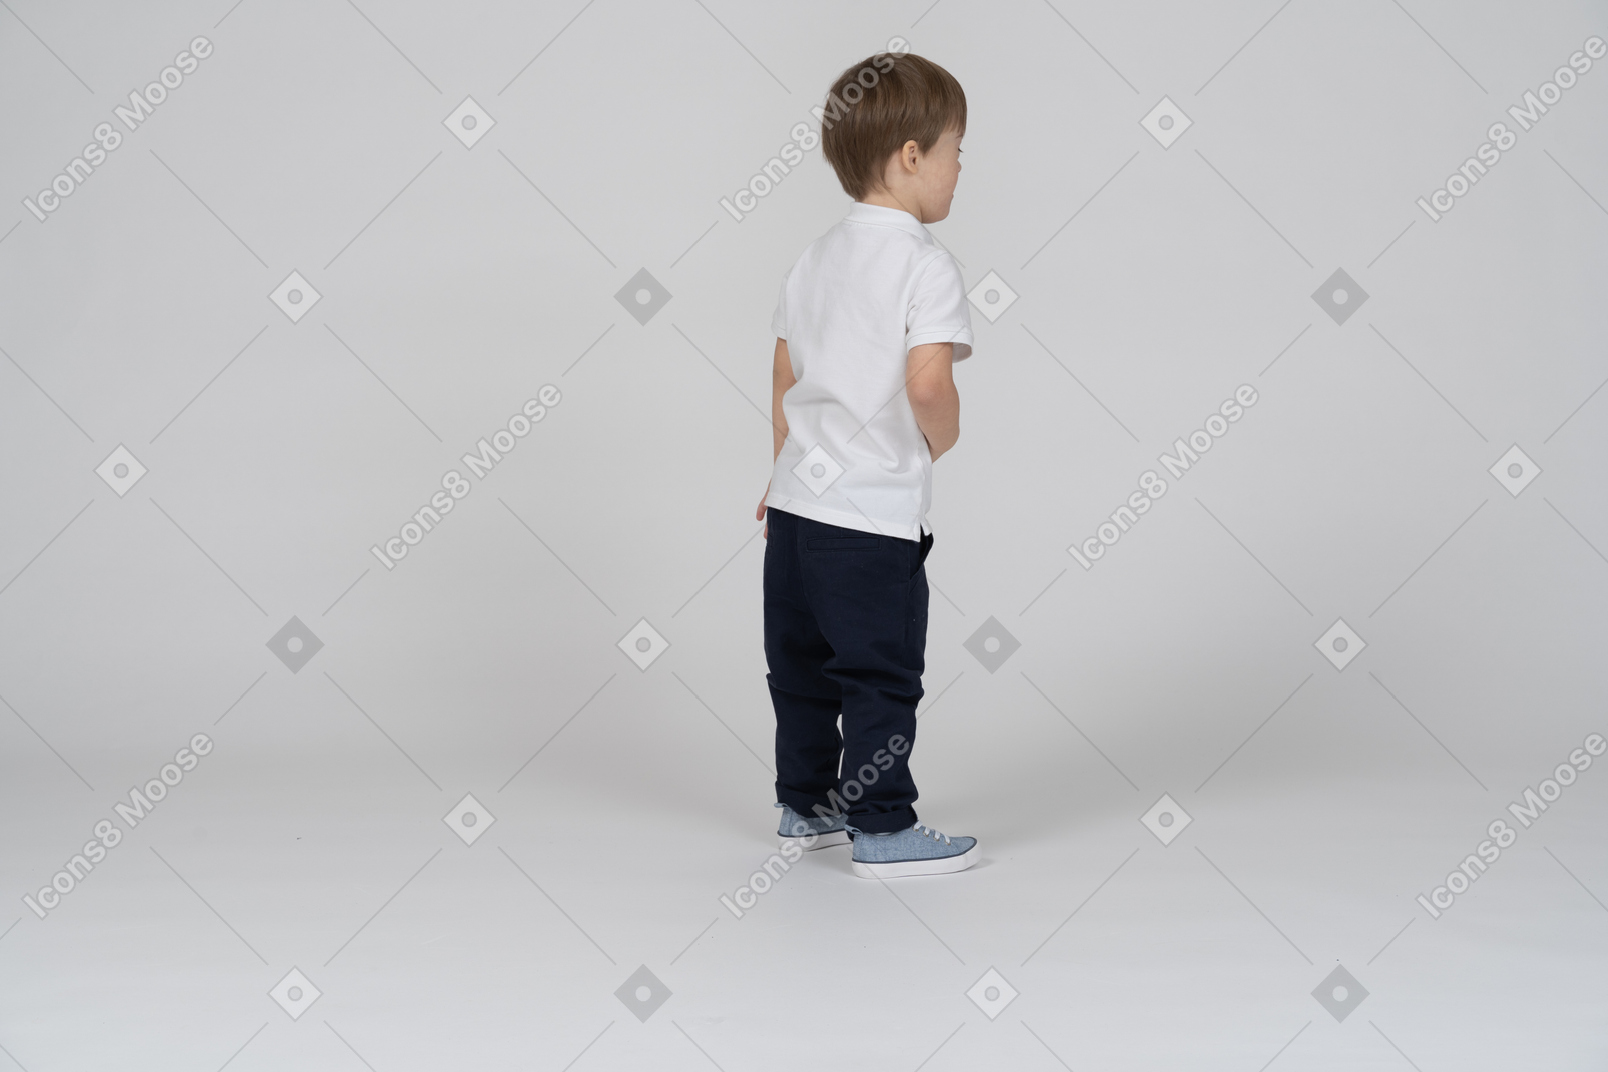 Back view of boy standing with his hand on his stomach